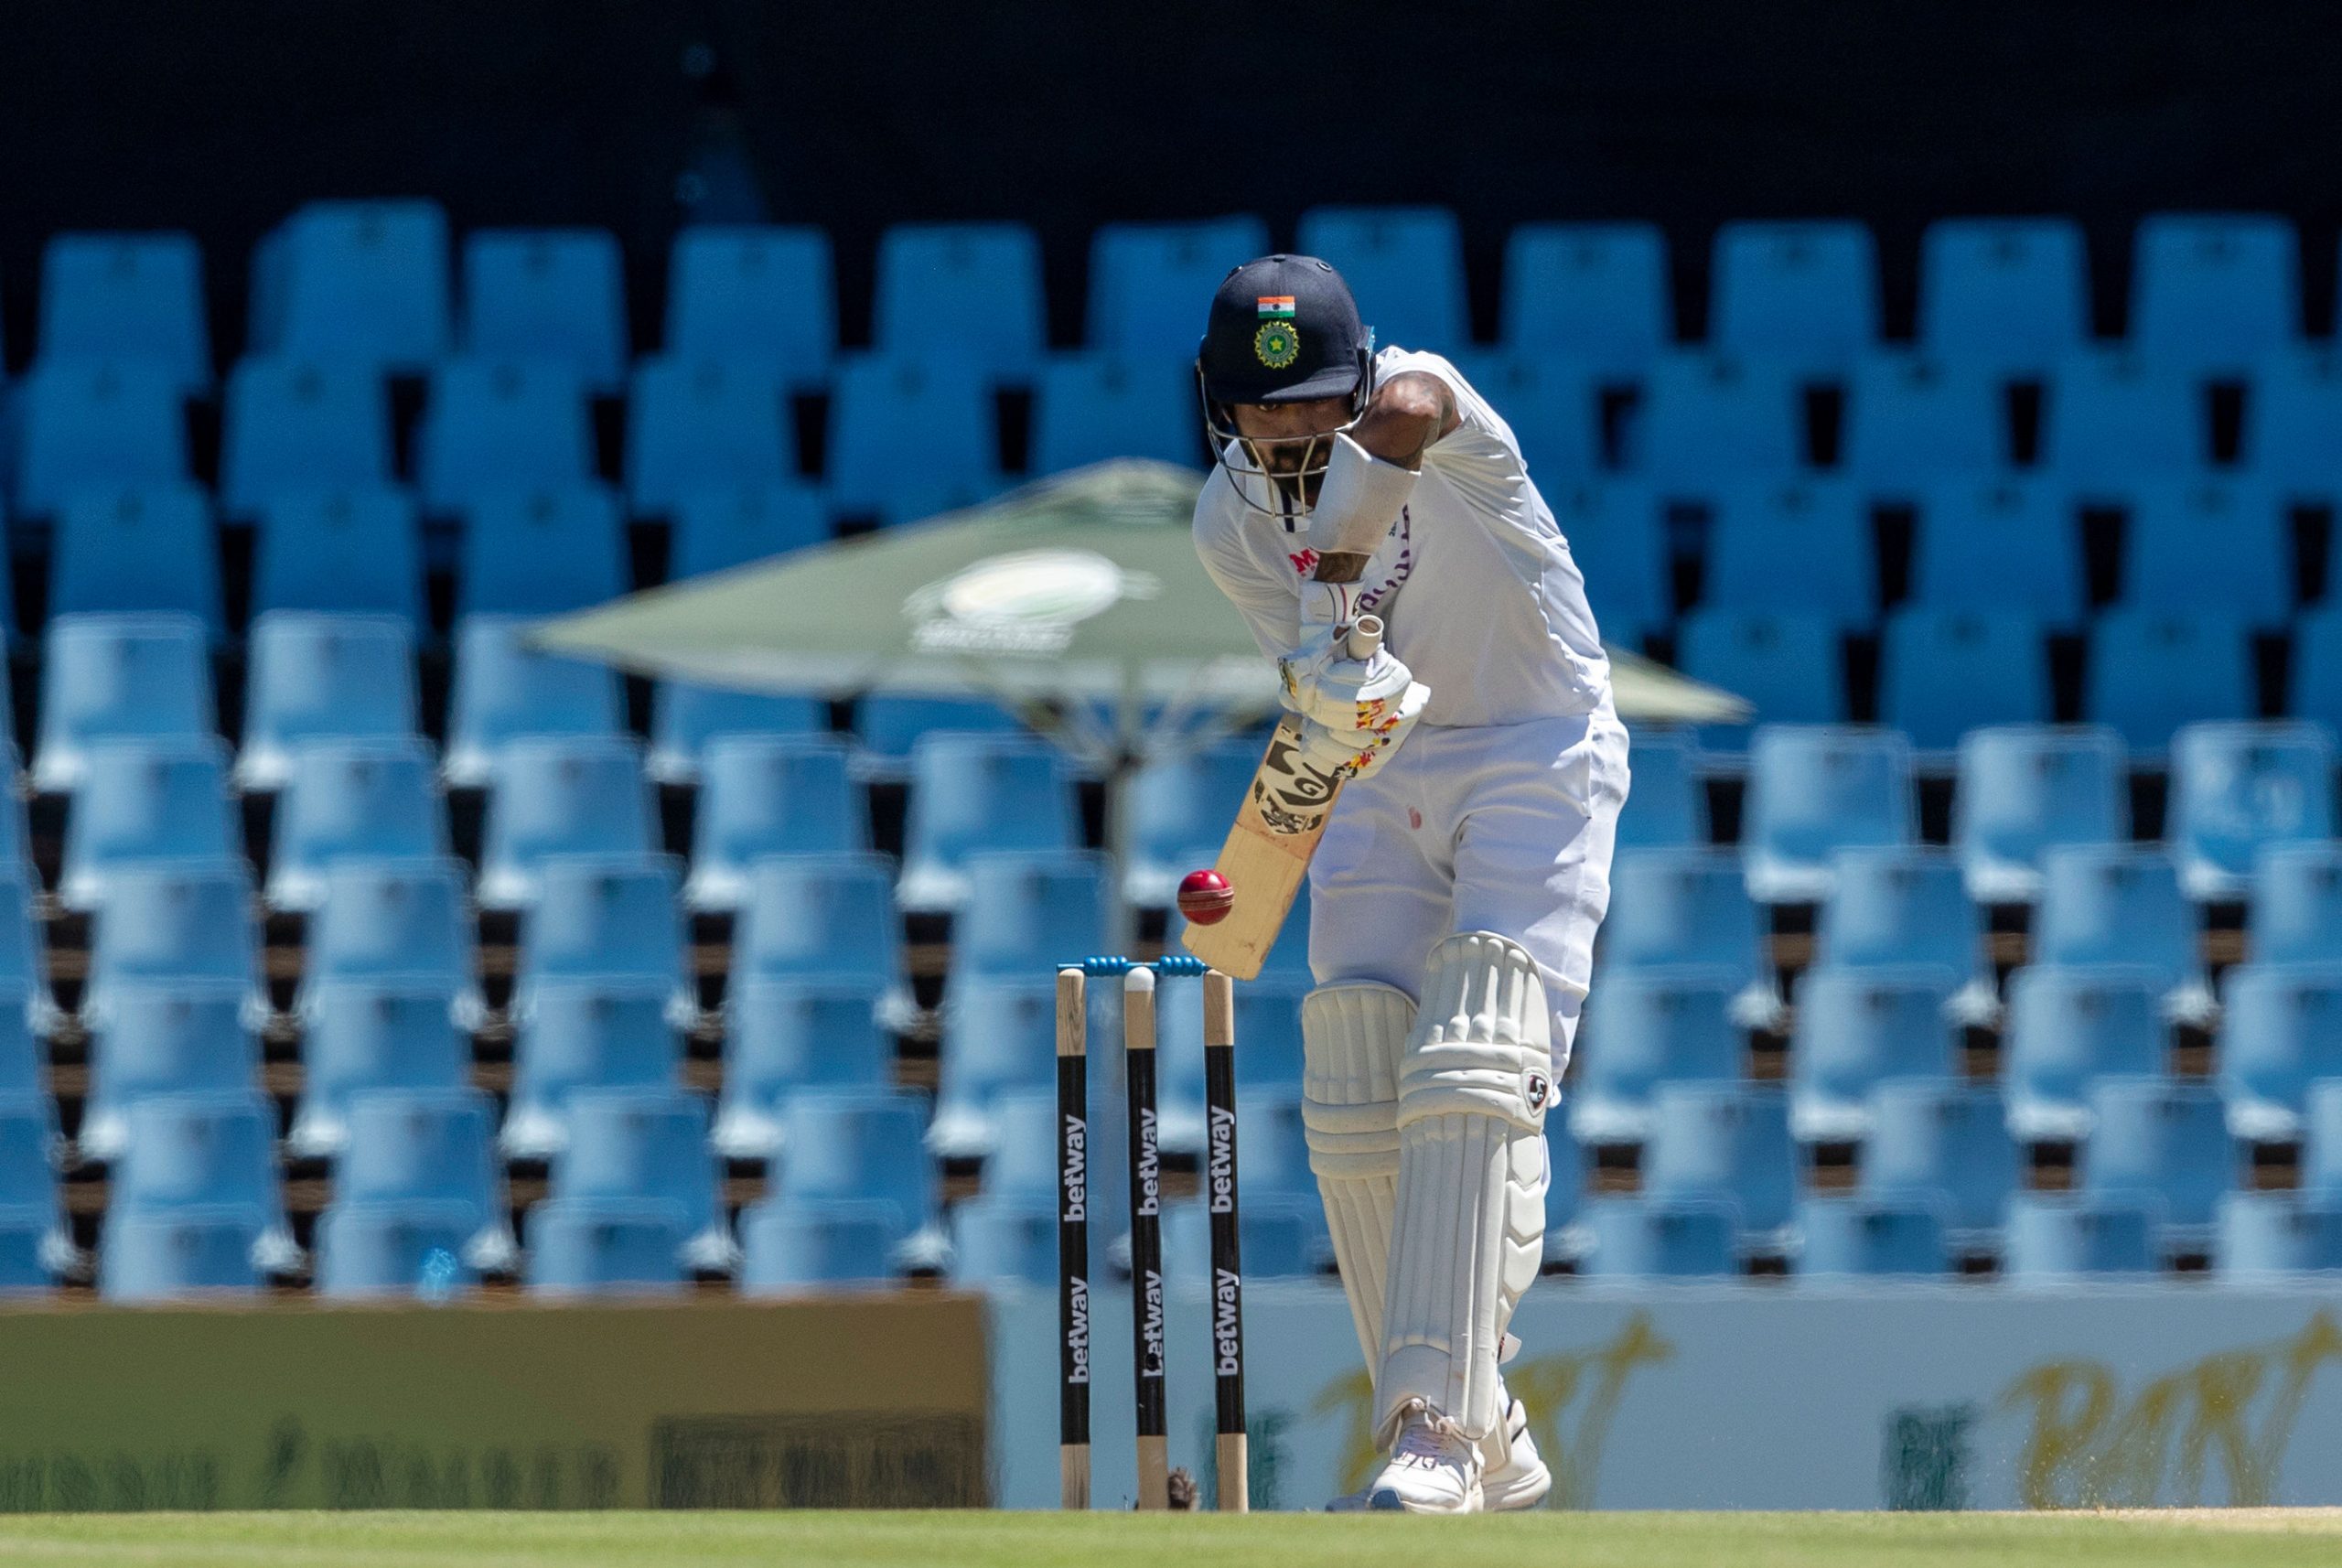 Centurion Test: KL Rahul reflects on performance, praises Indian pacers